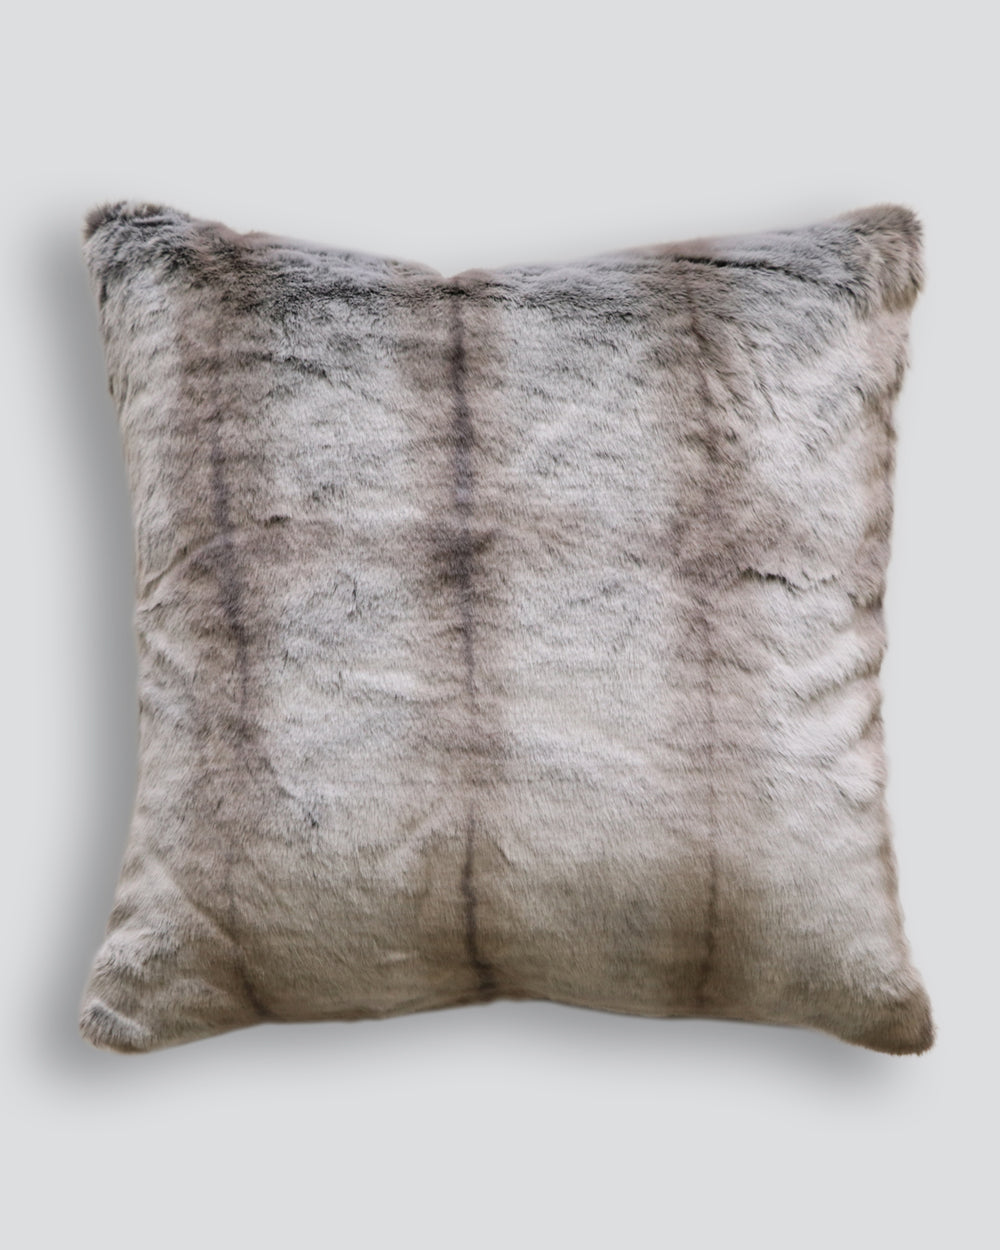 Heirloom Silver Marten Cushions in Faux Fur are available from Make Your House A Home Premium Stockist. Furniture Store Bendigo, Victoria. Australia Wide Delivery. Furtex Baya.